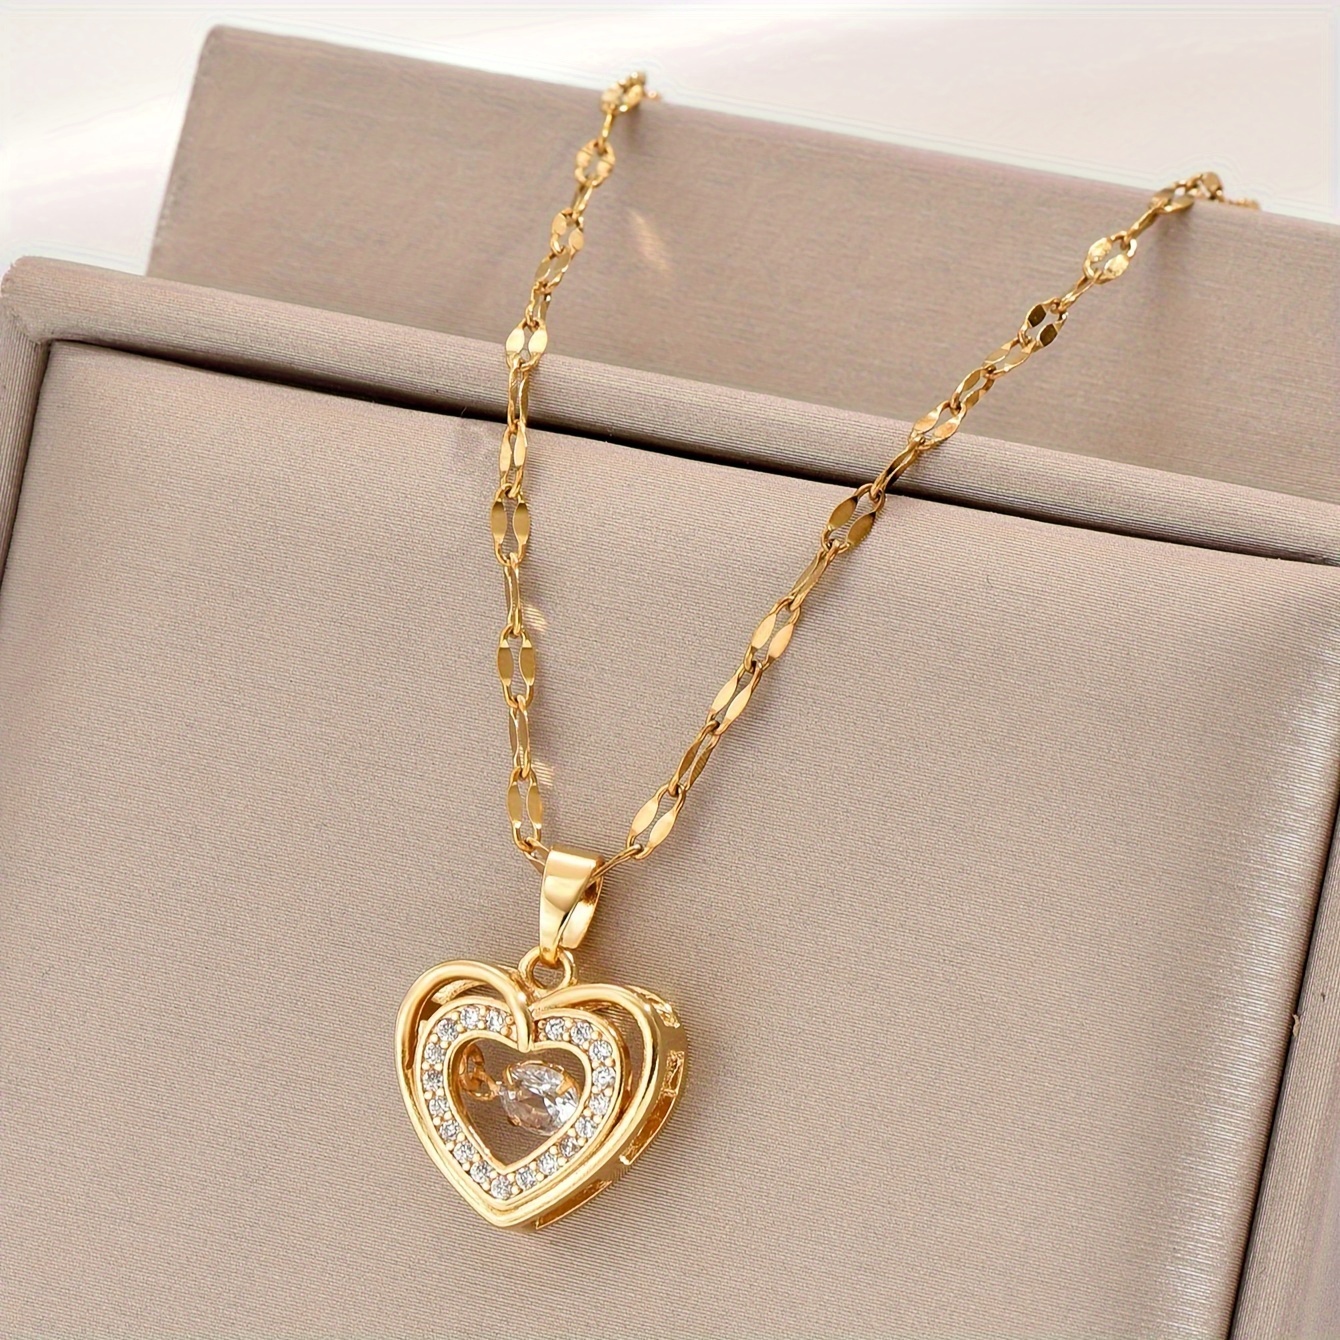 18k Gold Love Heart Necklace Chain Pendant Wedding Engagement Party Jewelry  Gift